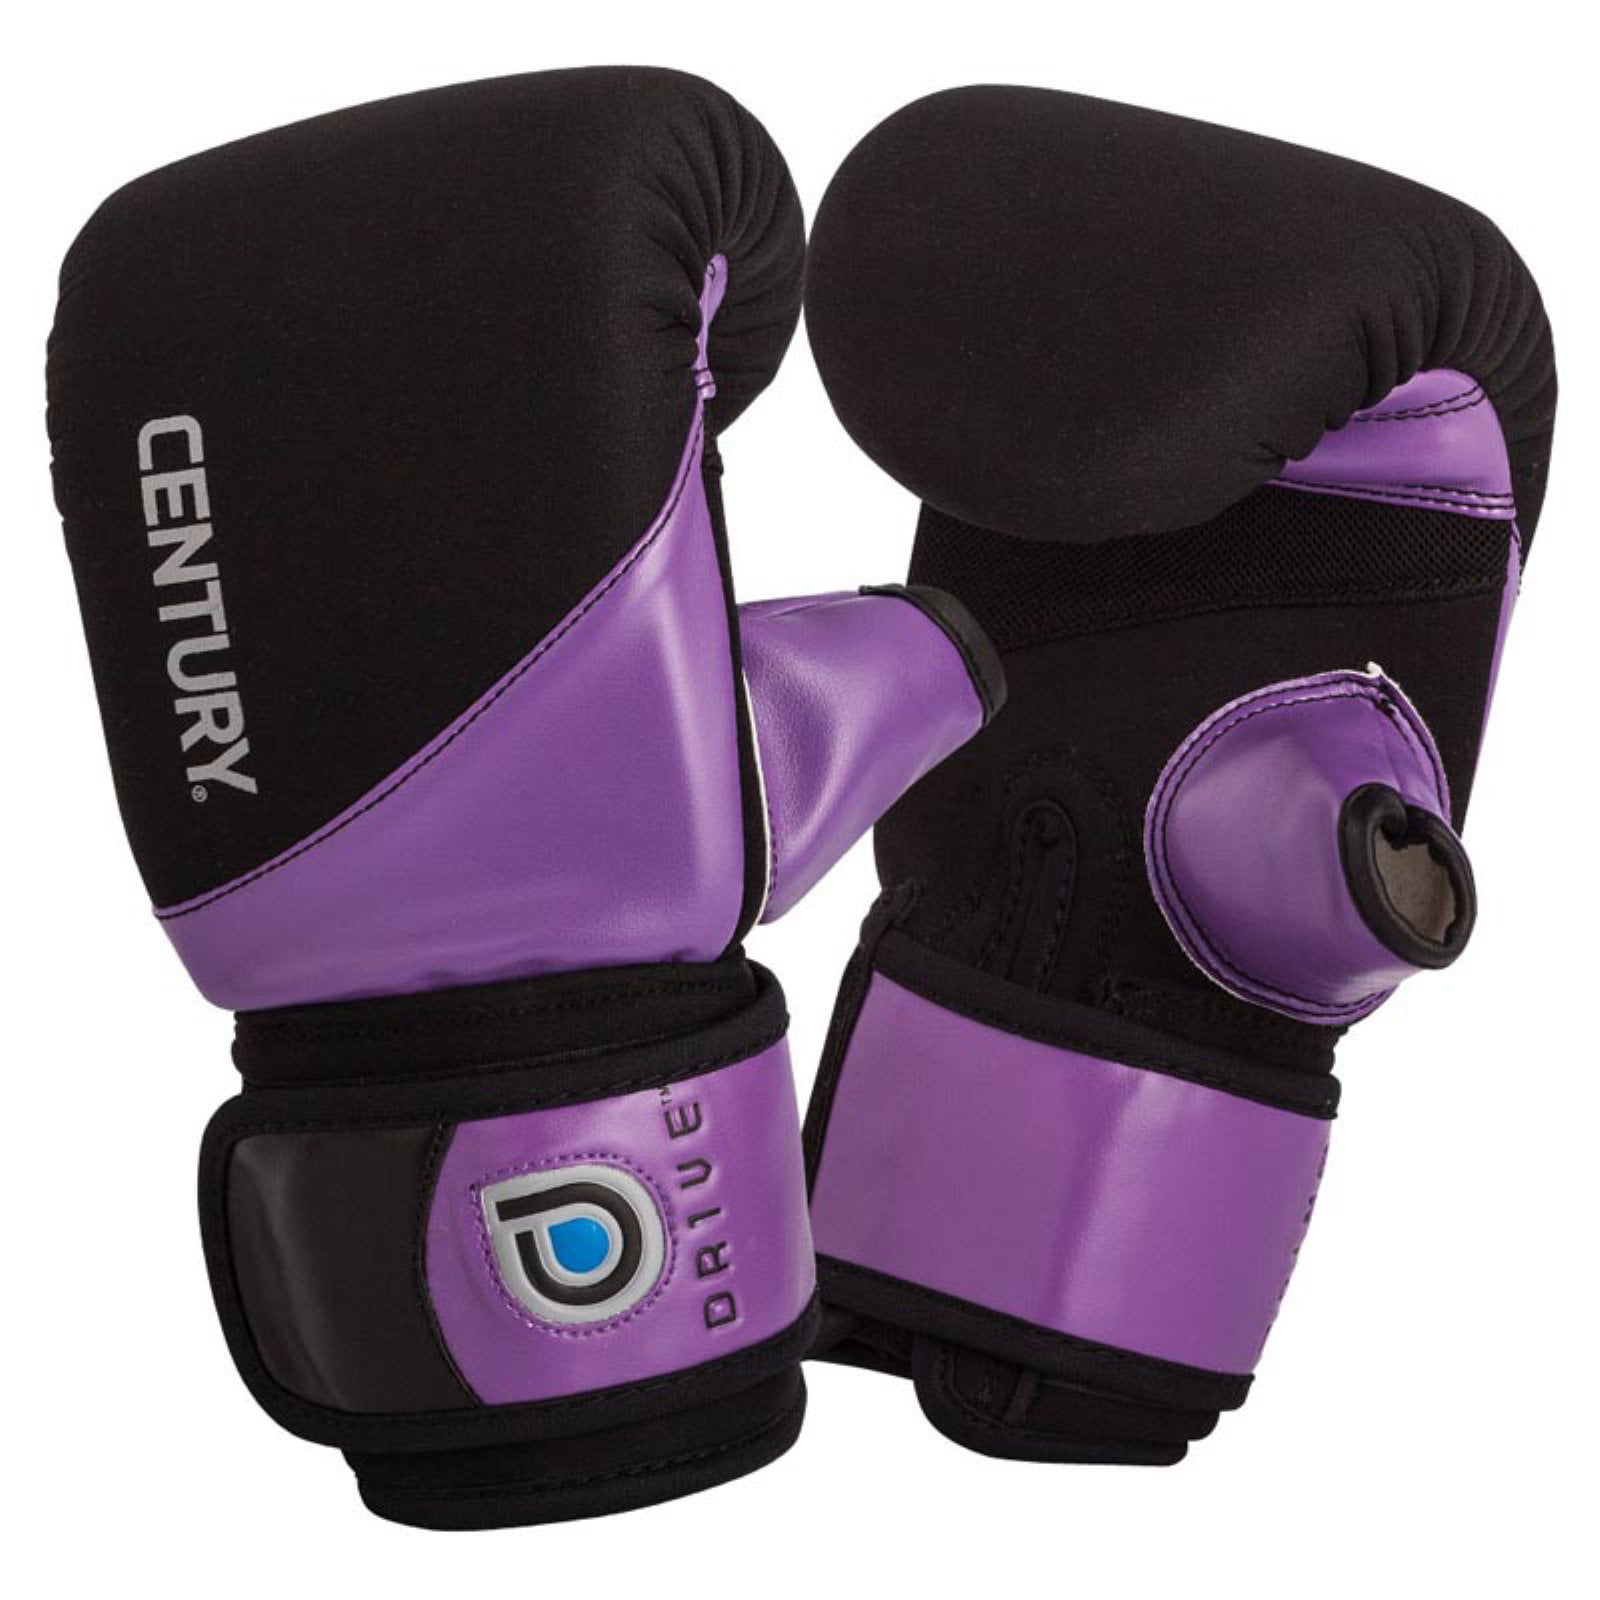 CENTURY Expert Training Gear Fight Gloves MMA Grappling Men's XL for sale online 2 Pairs 